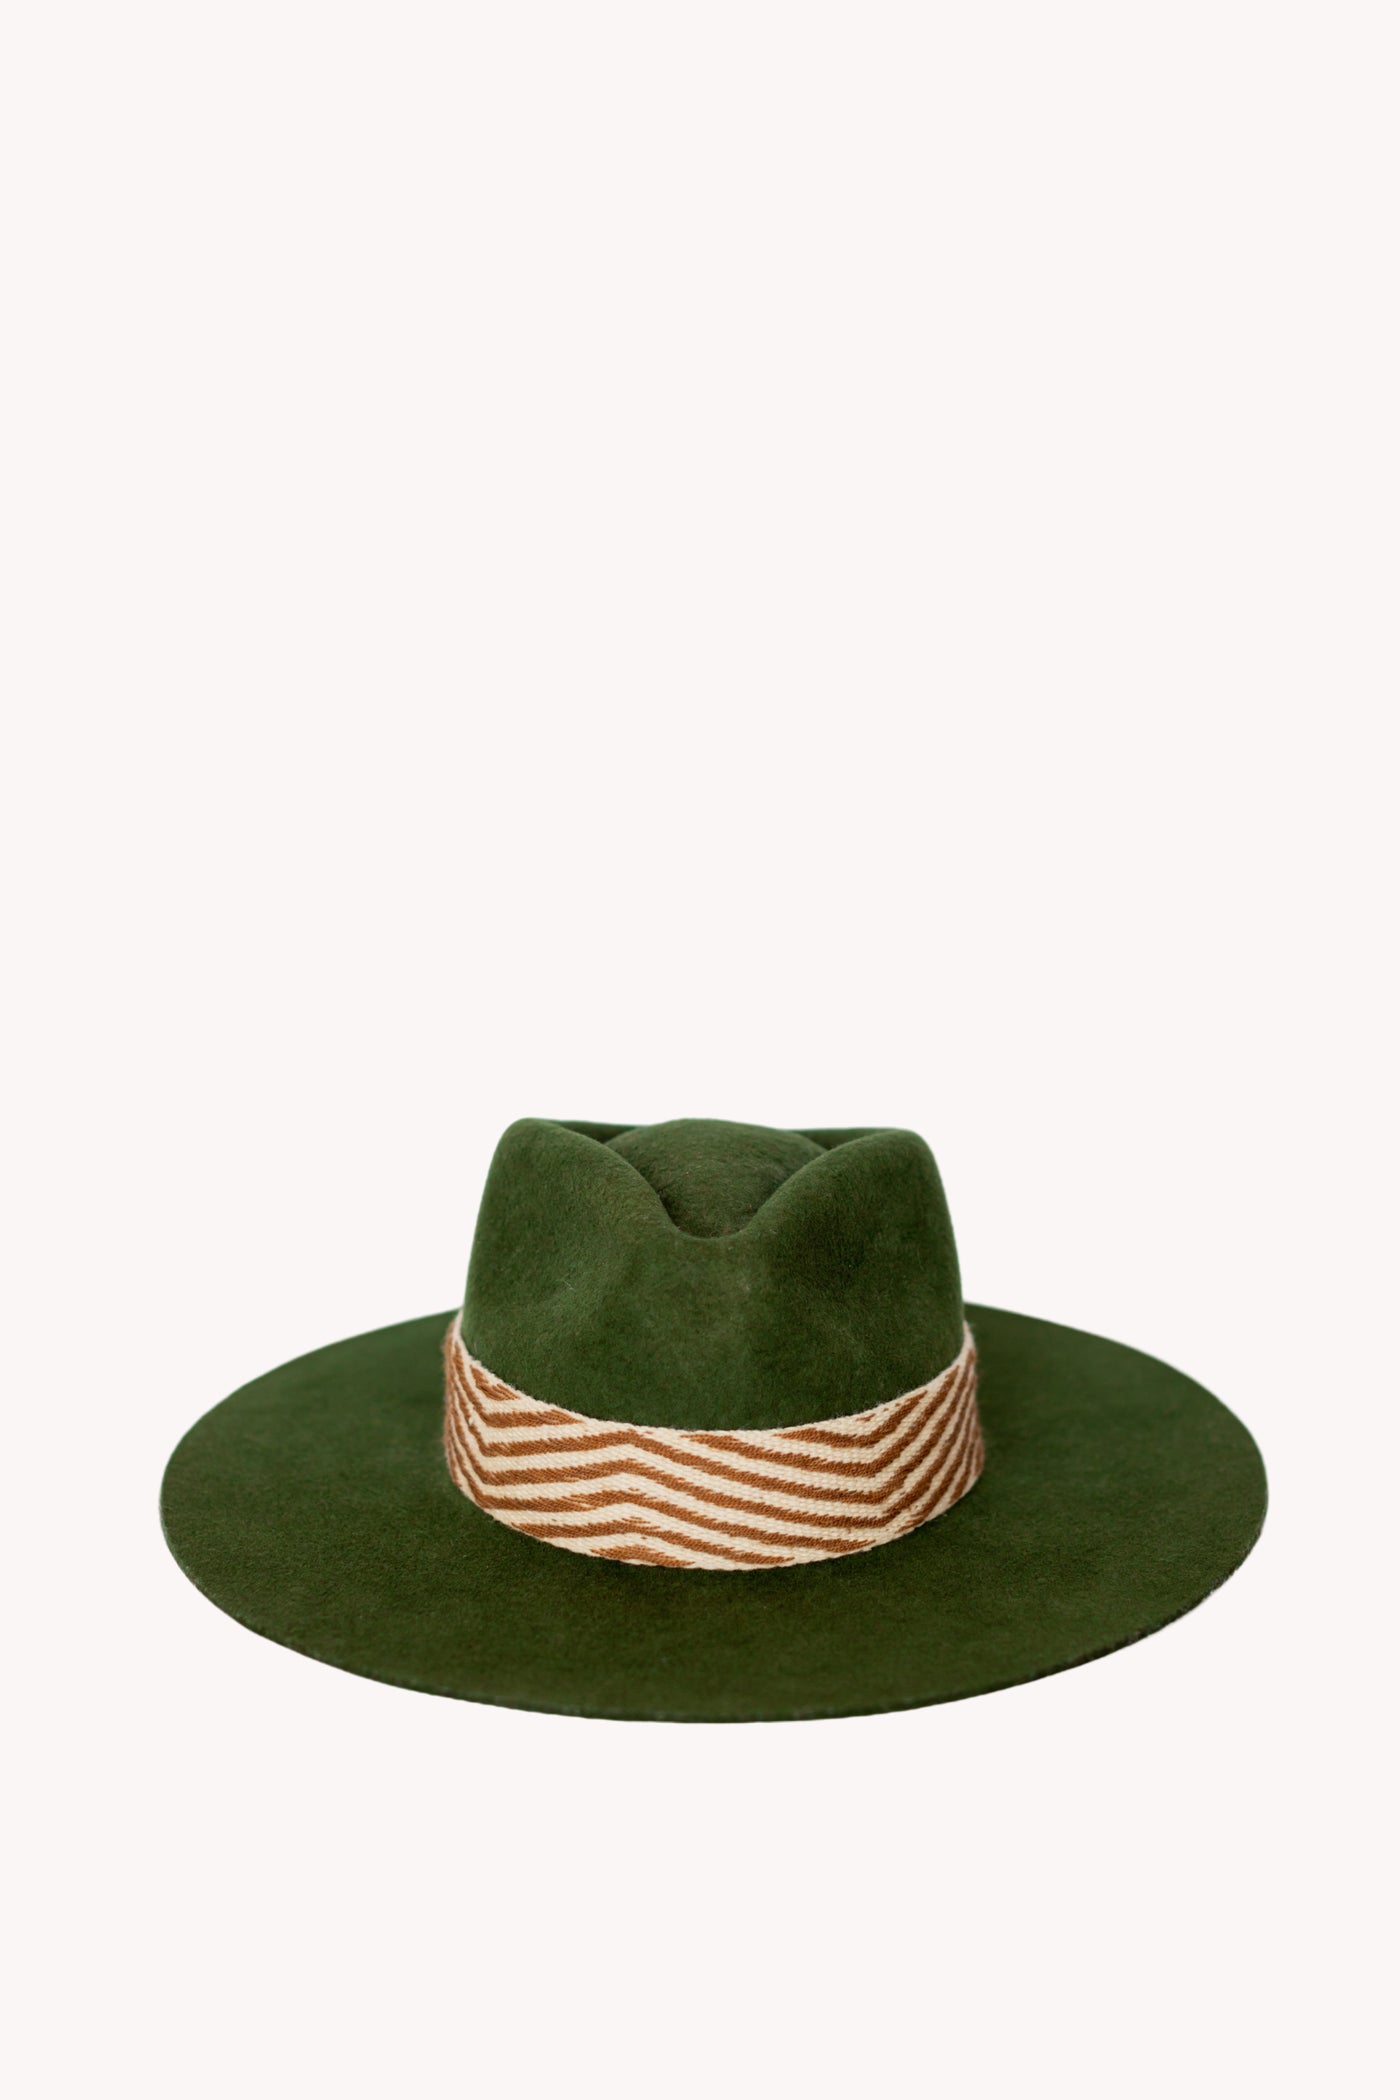 Hunter Green Western Hat with Surrender Intention Band Removable Intention Hat Textile Band